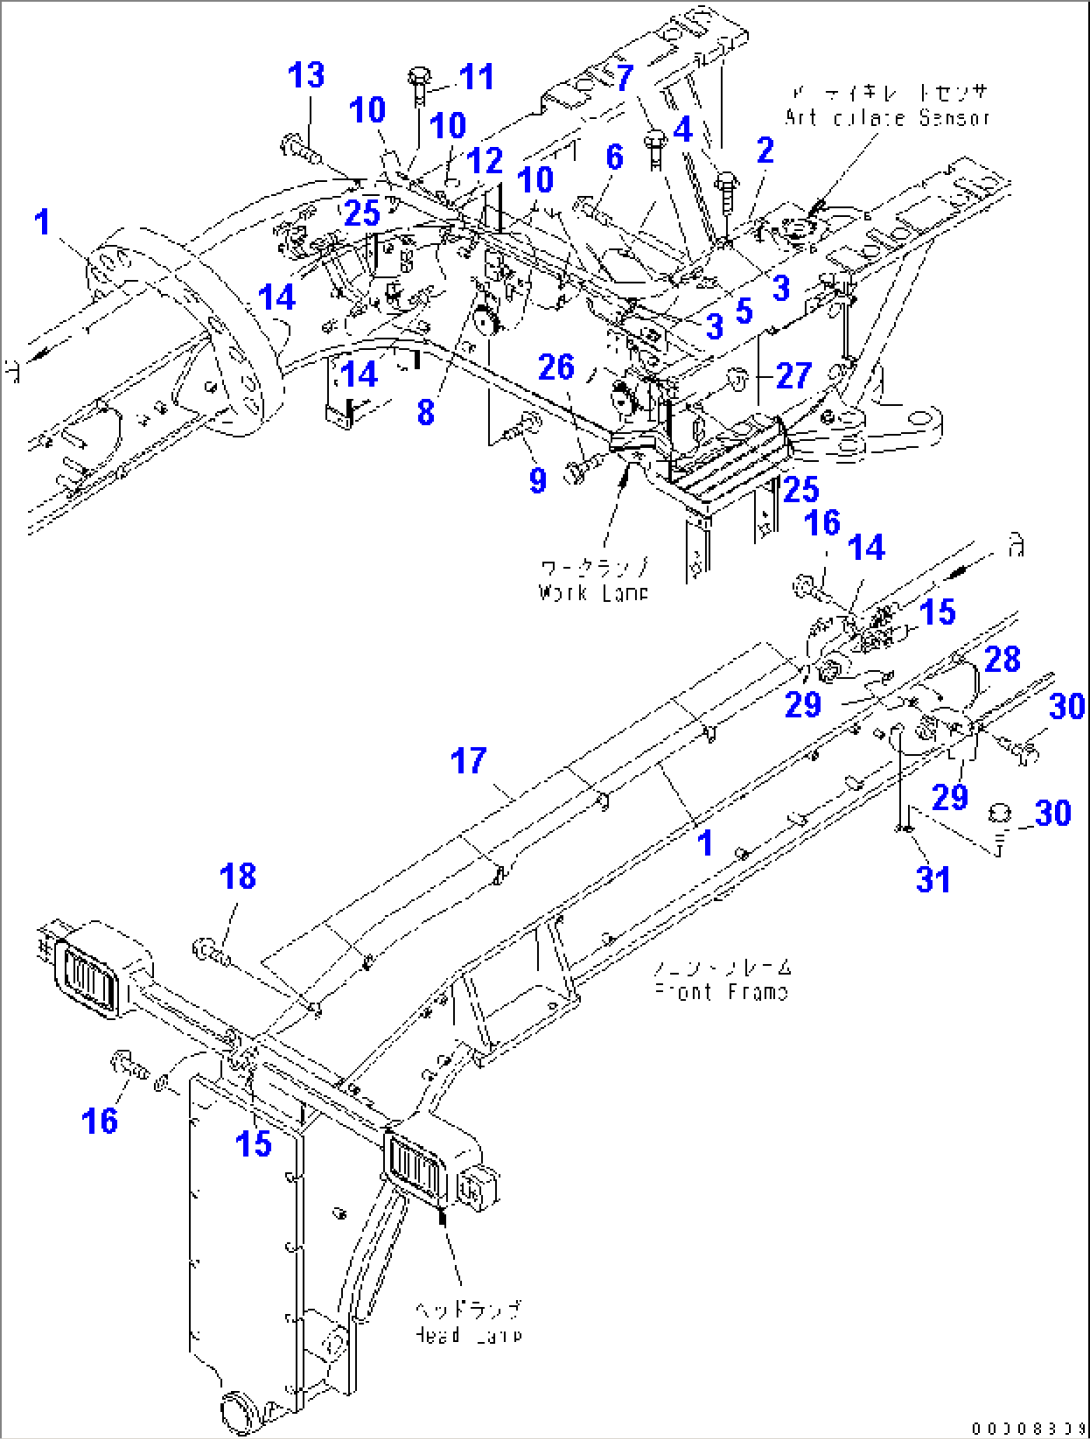 FRONT FRAME HARNESS (WITH BLADE ACCUMULATOR)(#51001-)